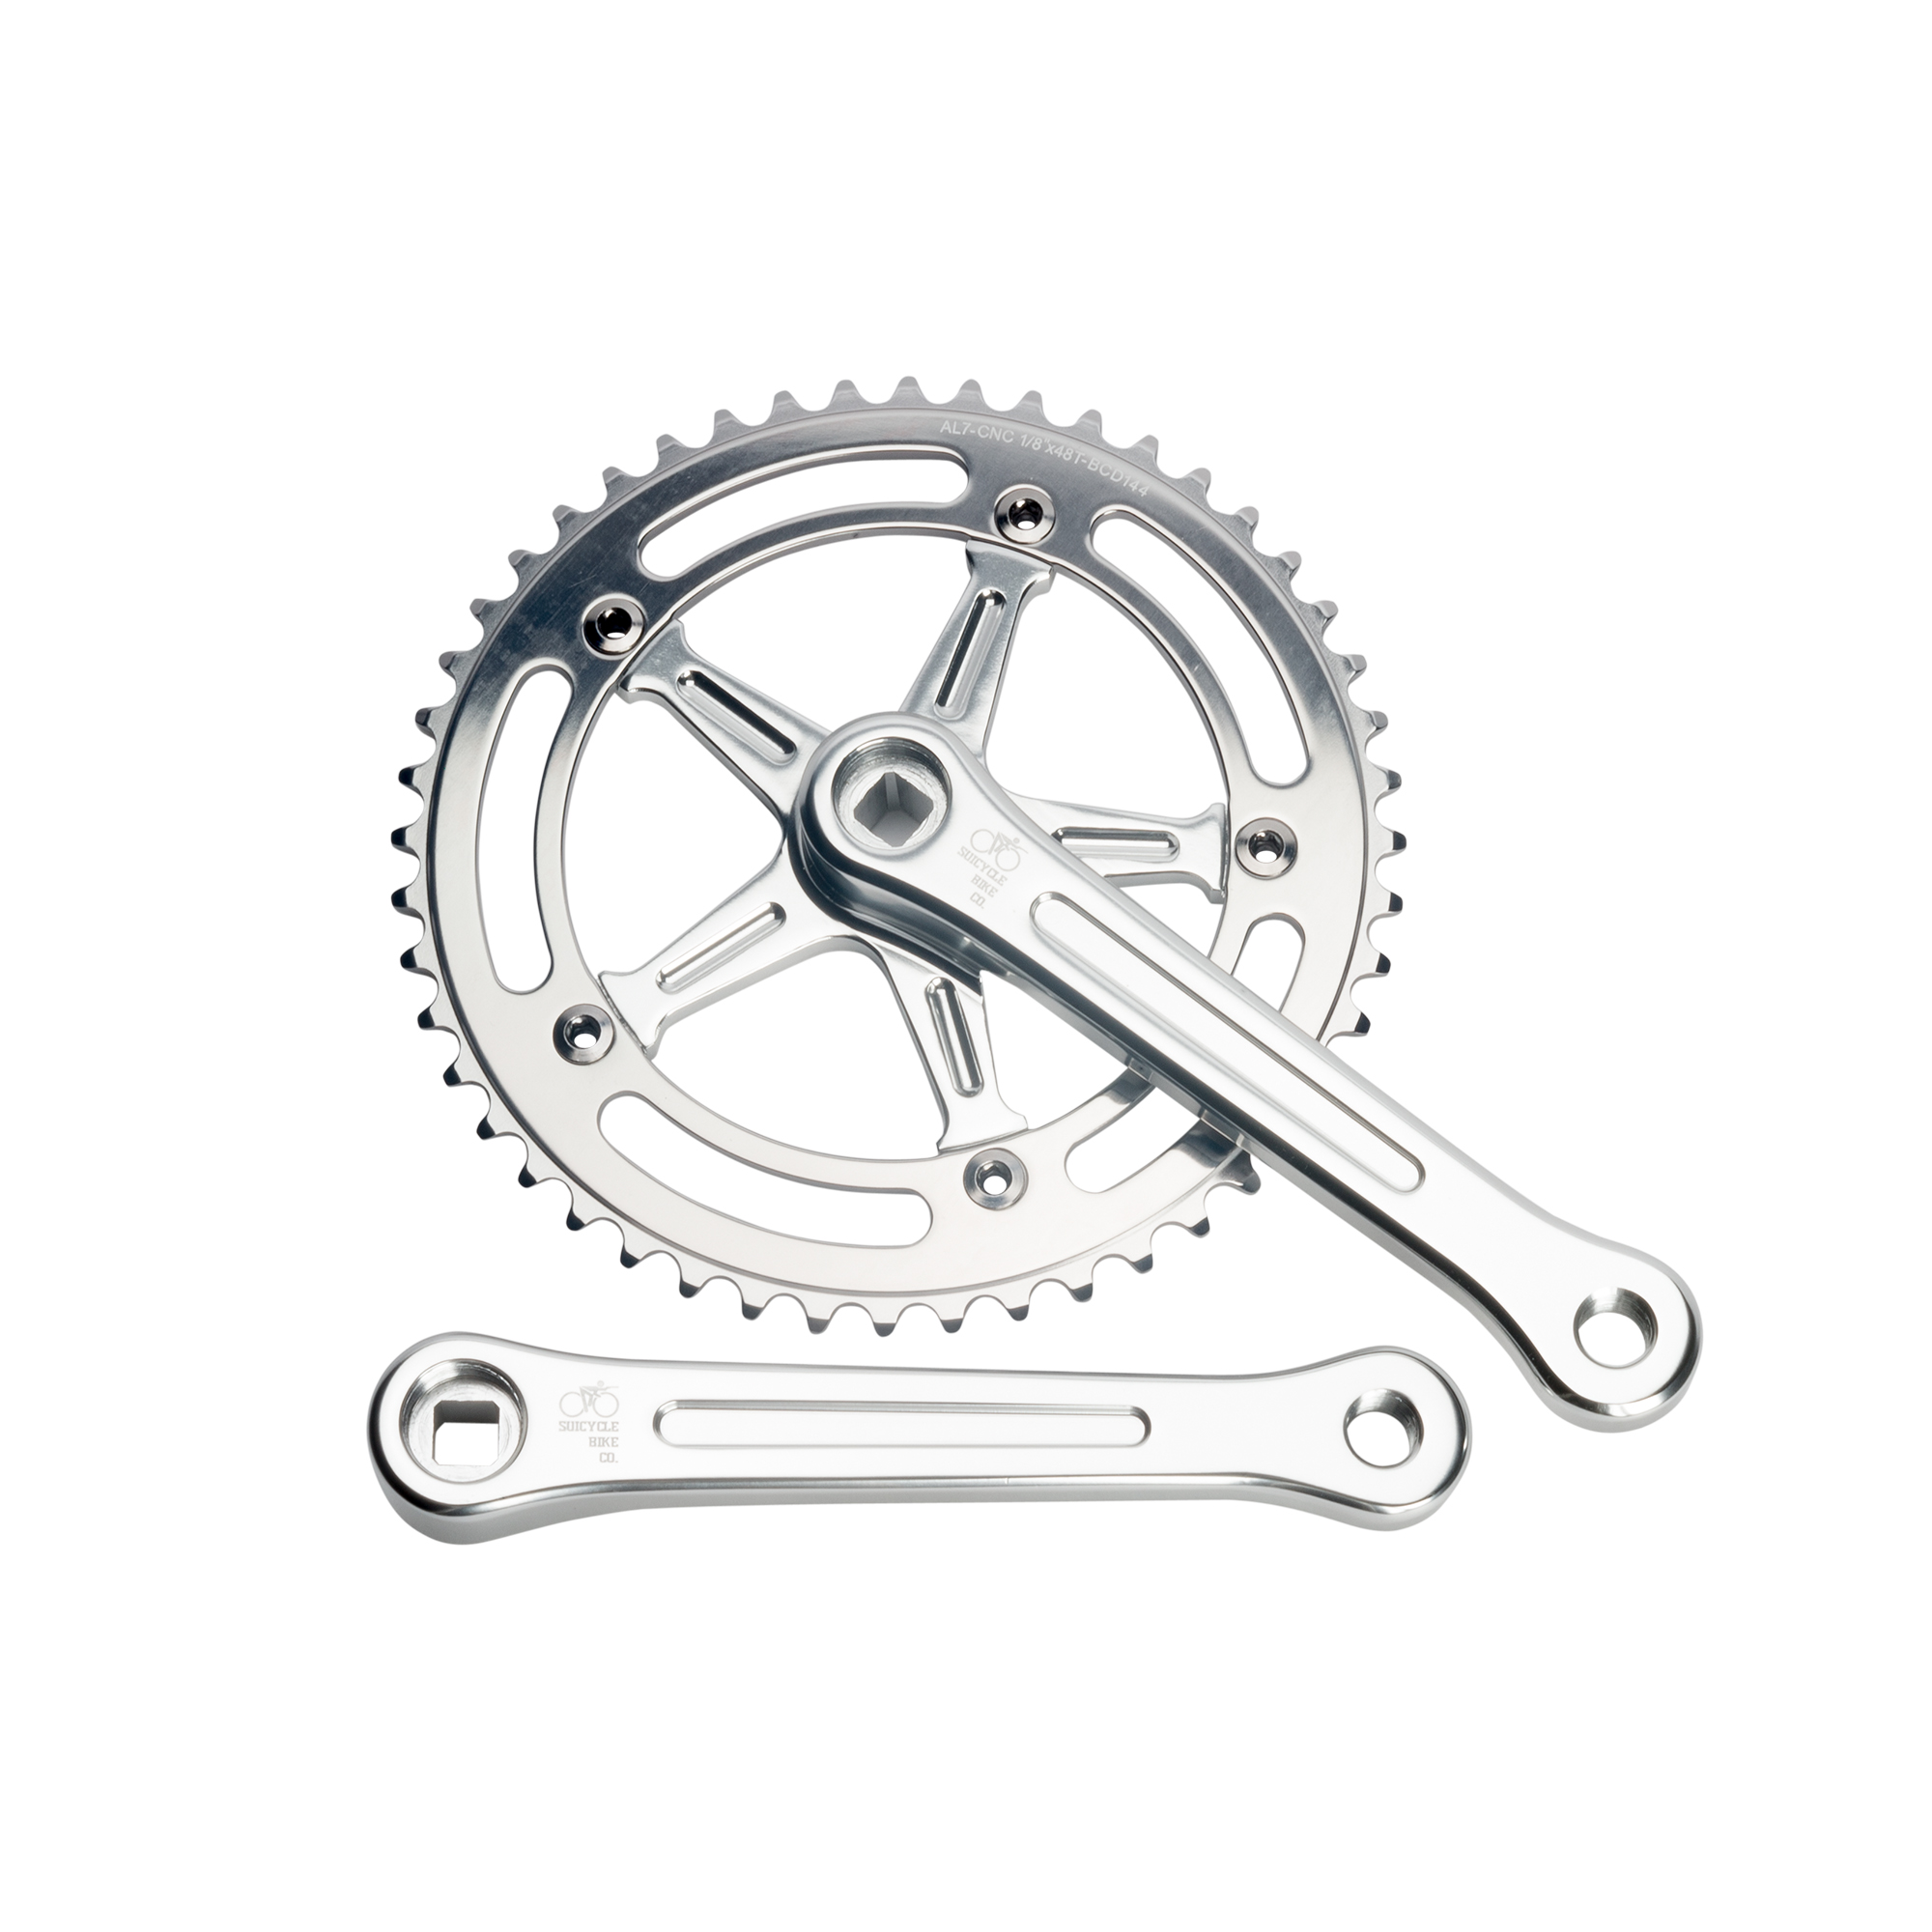 https://suicycle-store.com/wp-content/uploads/2017/02/Suicycle_Crank_Classic_Silver_1.jpg